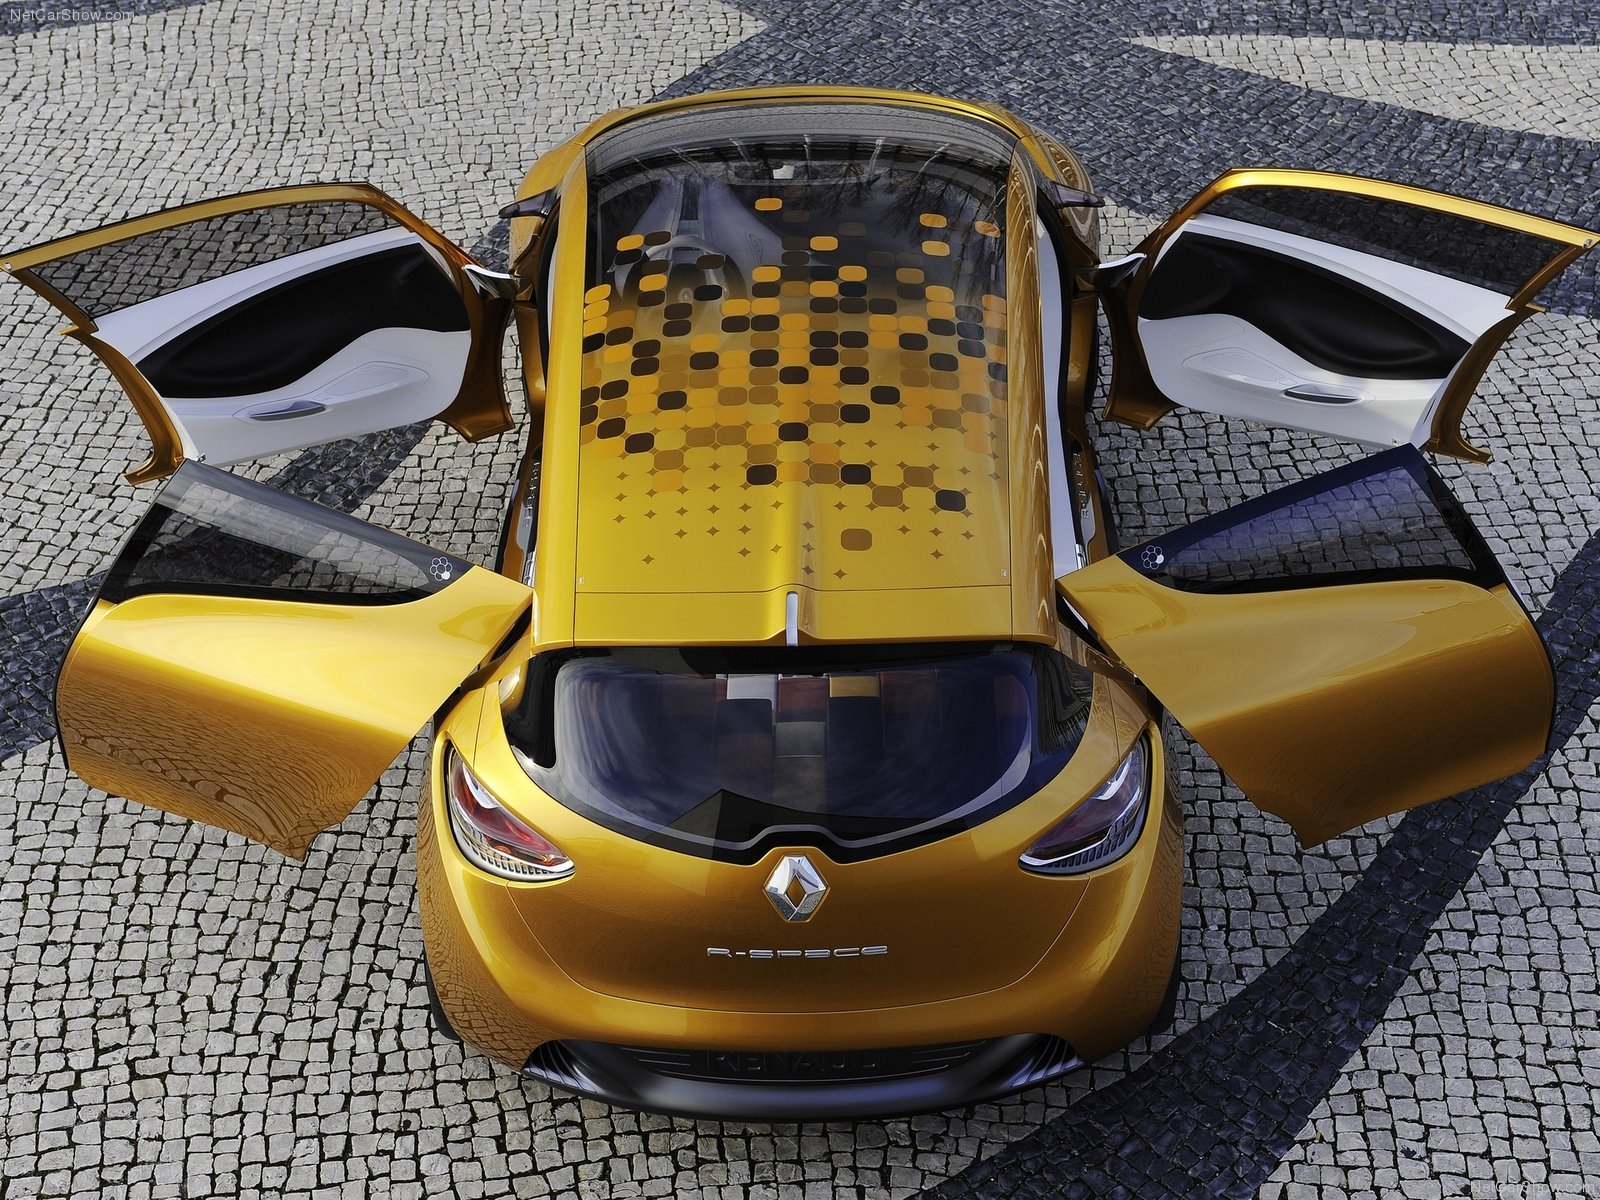 renault, R space, Concept, Cars, 2011 Wallpaper